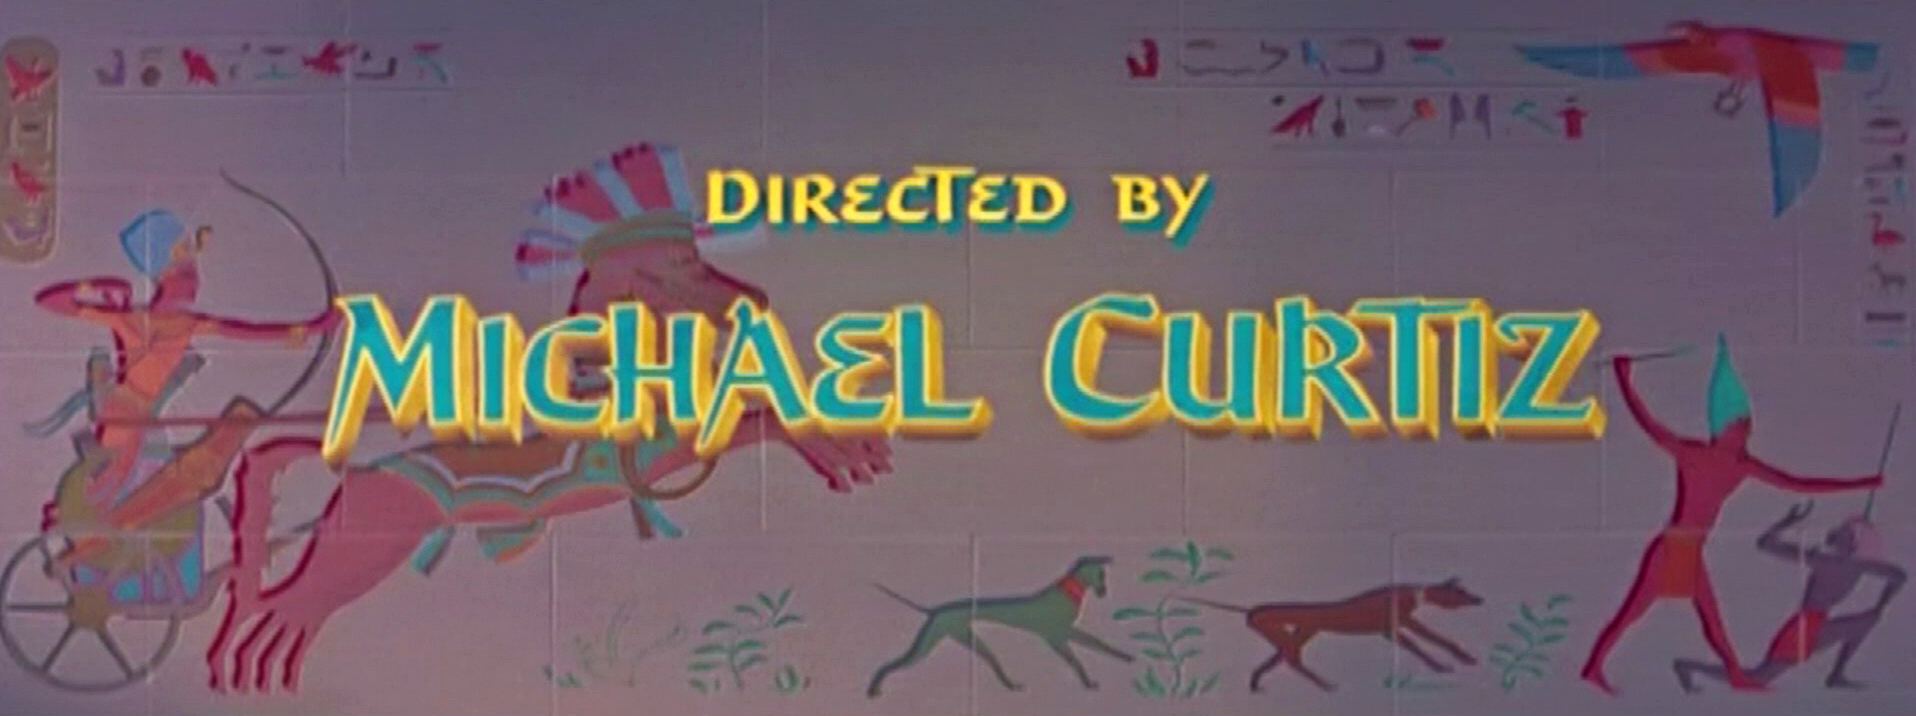 Main title from The Egyptian (1954) (13). Directed by Michael Curtiz